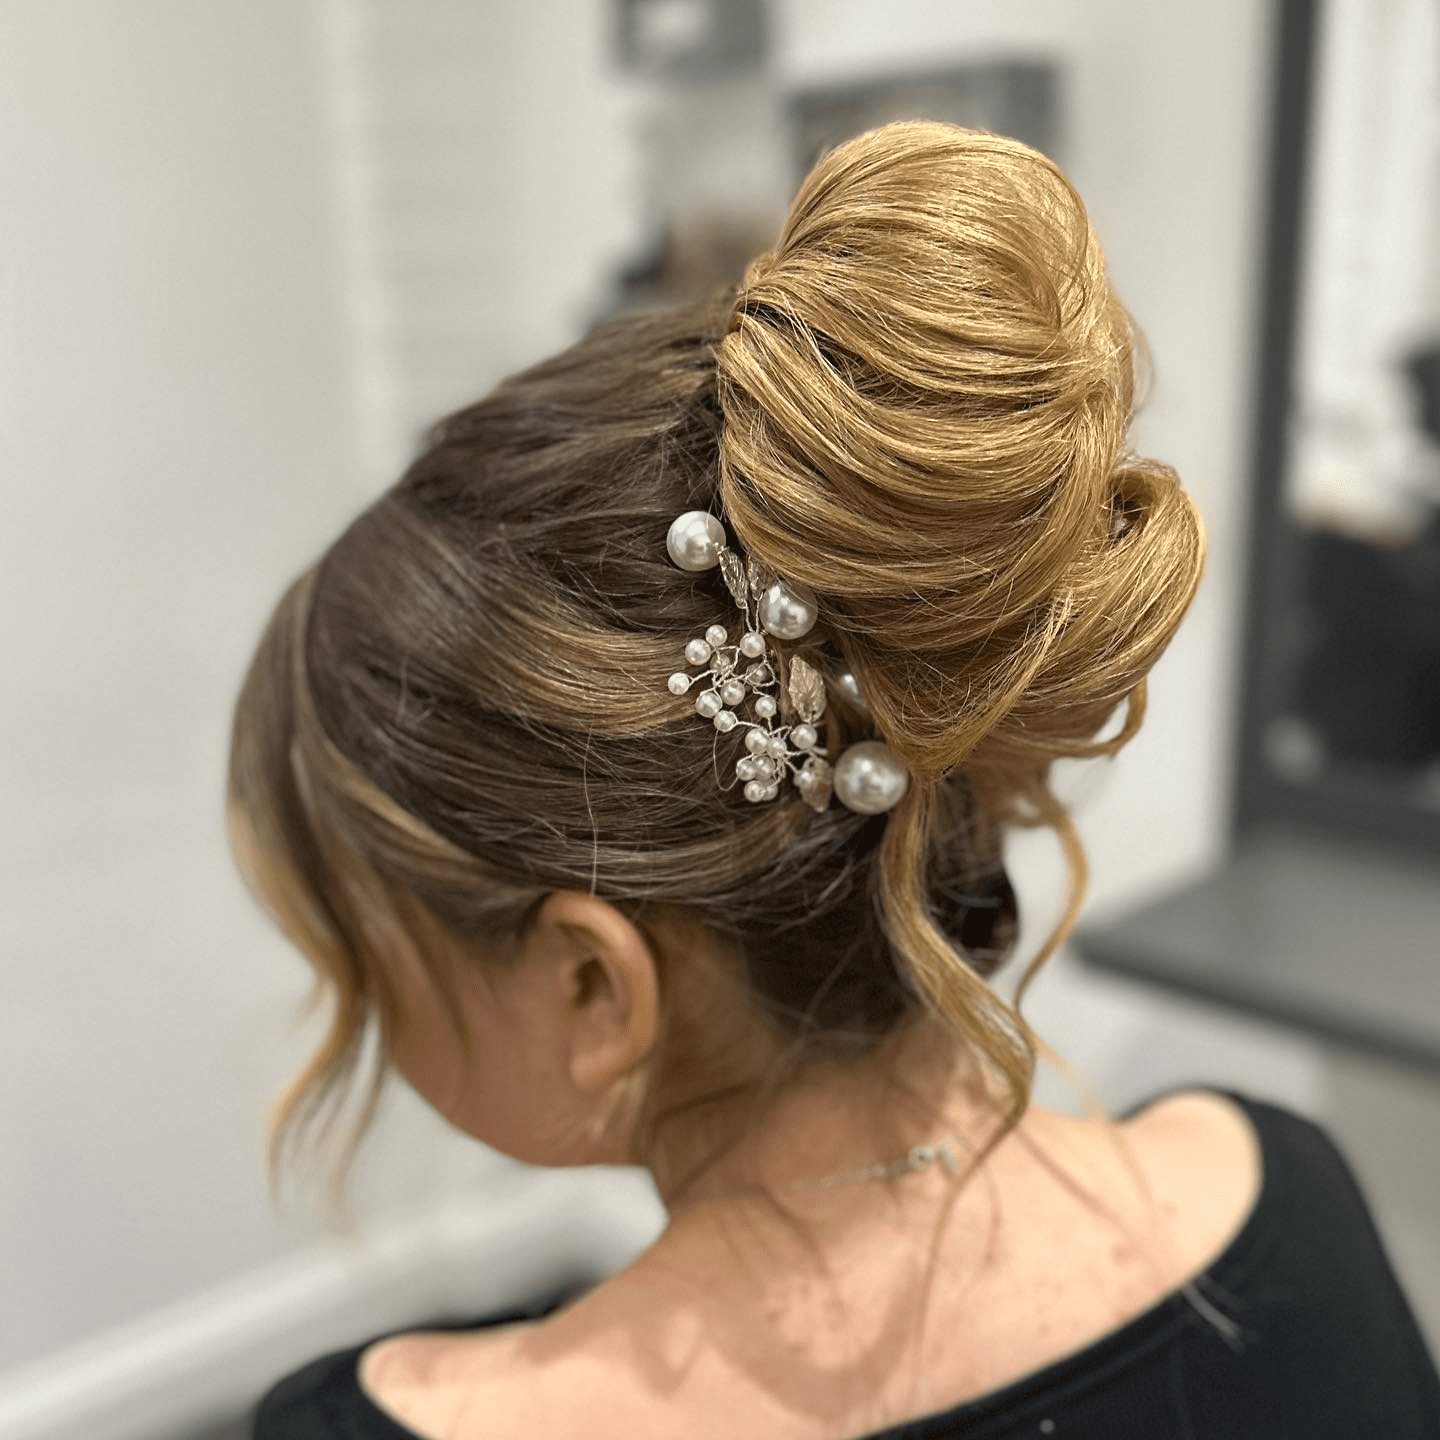 Elegance in Twists and Pearls